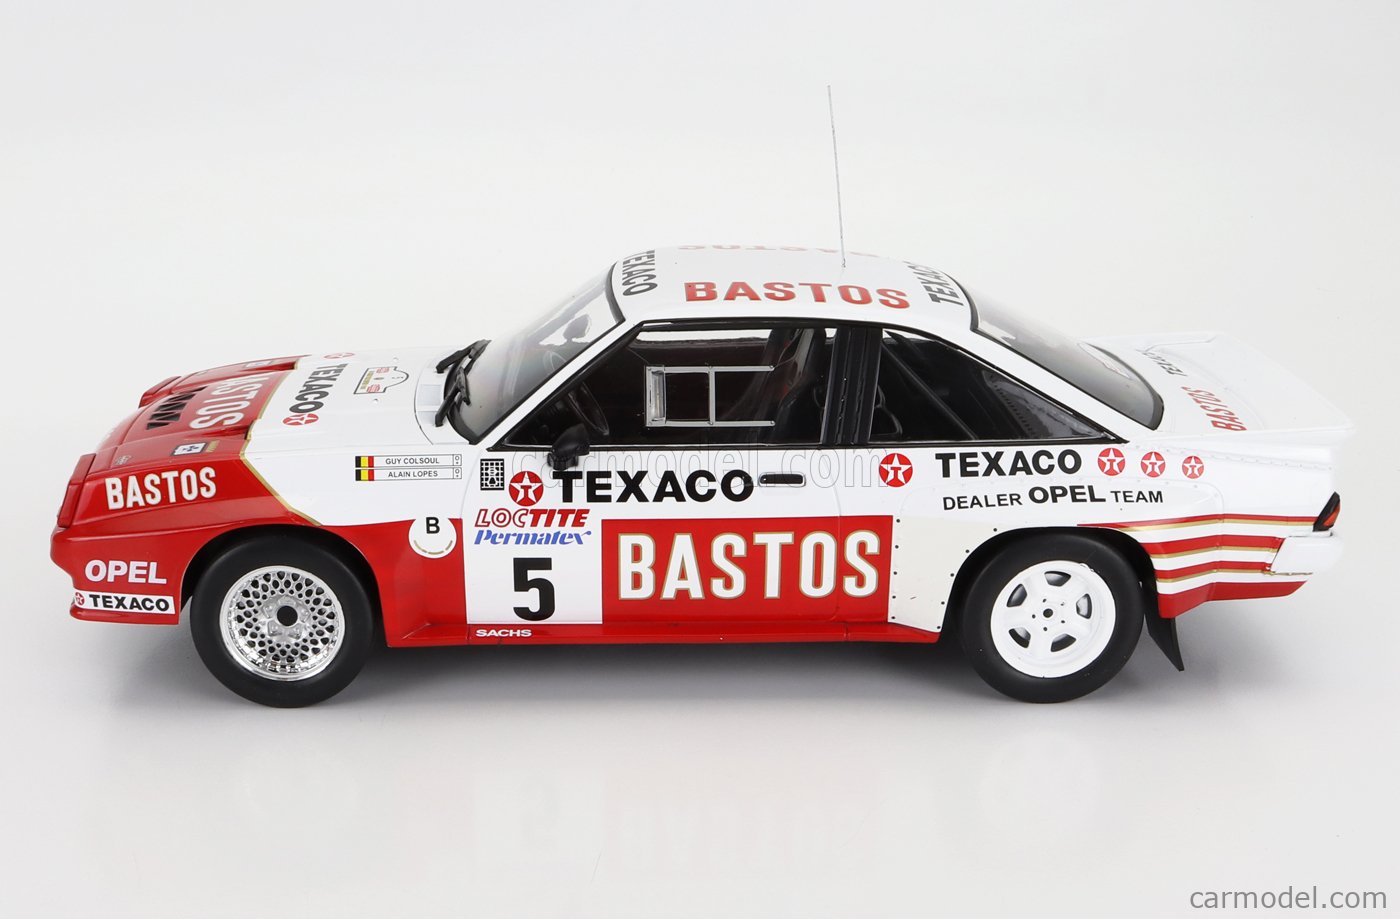 IXO-MODELS 18RMC134.22 Echelle 1/18  OPEL MANTA 400 BASTOS N 5 RALLY YPRES 1985 G.COLSOUL - A.LOPES WHITE RED